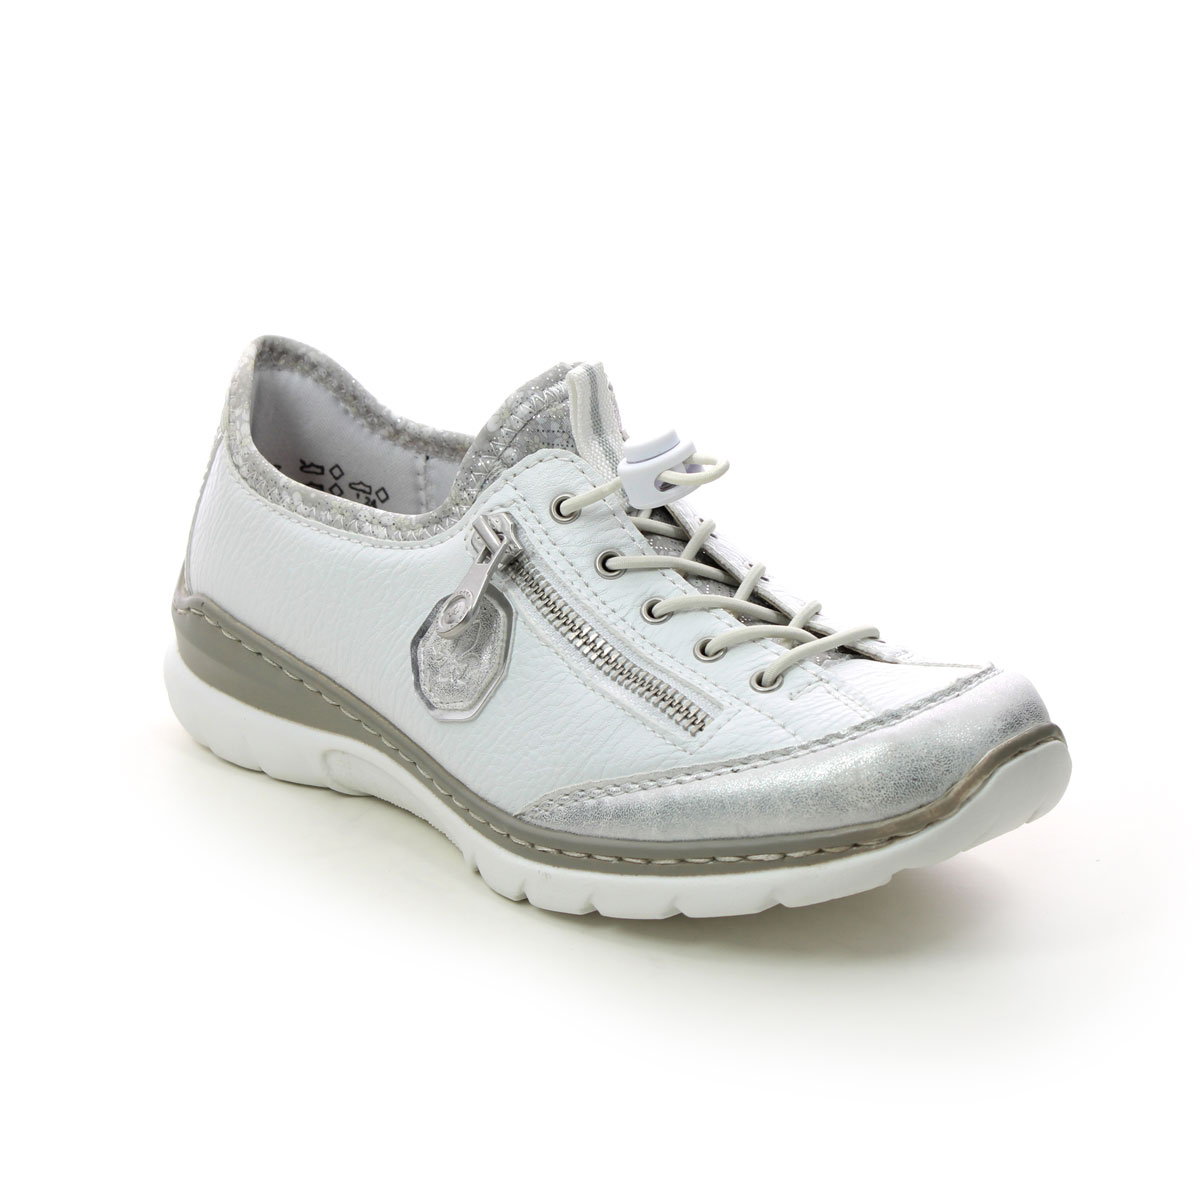 Rieker Memosil White Silver Womens Lacing Shoes L3263-80 In Size 42 In Plain White Silver